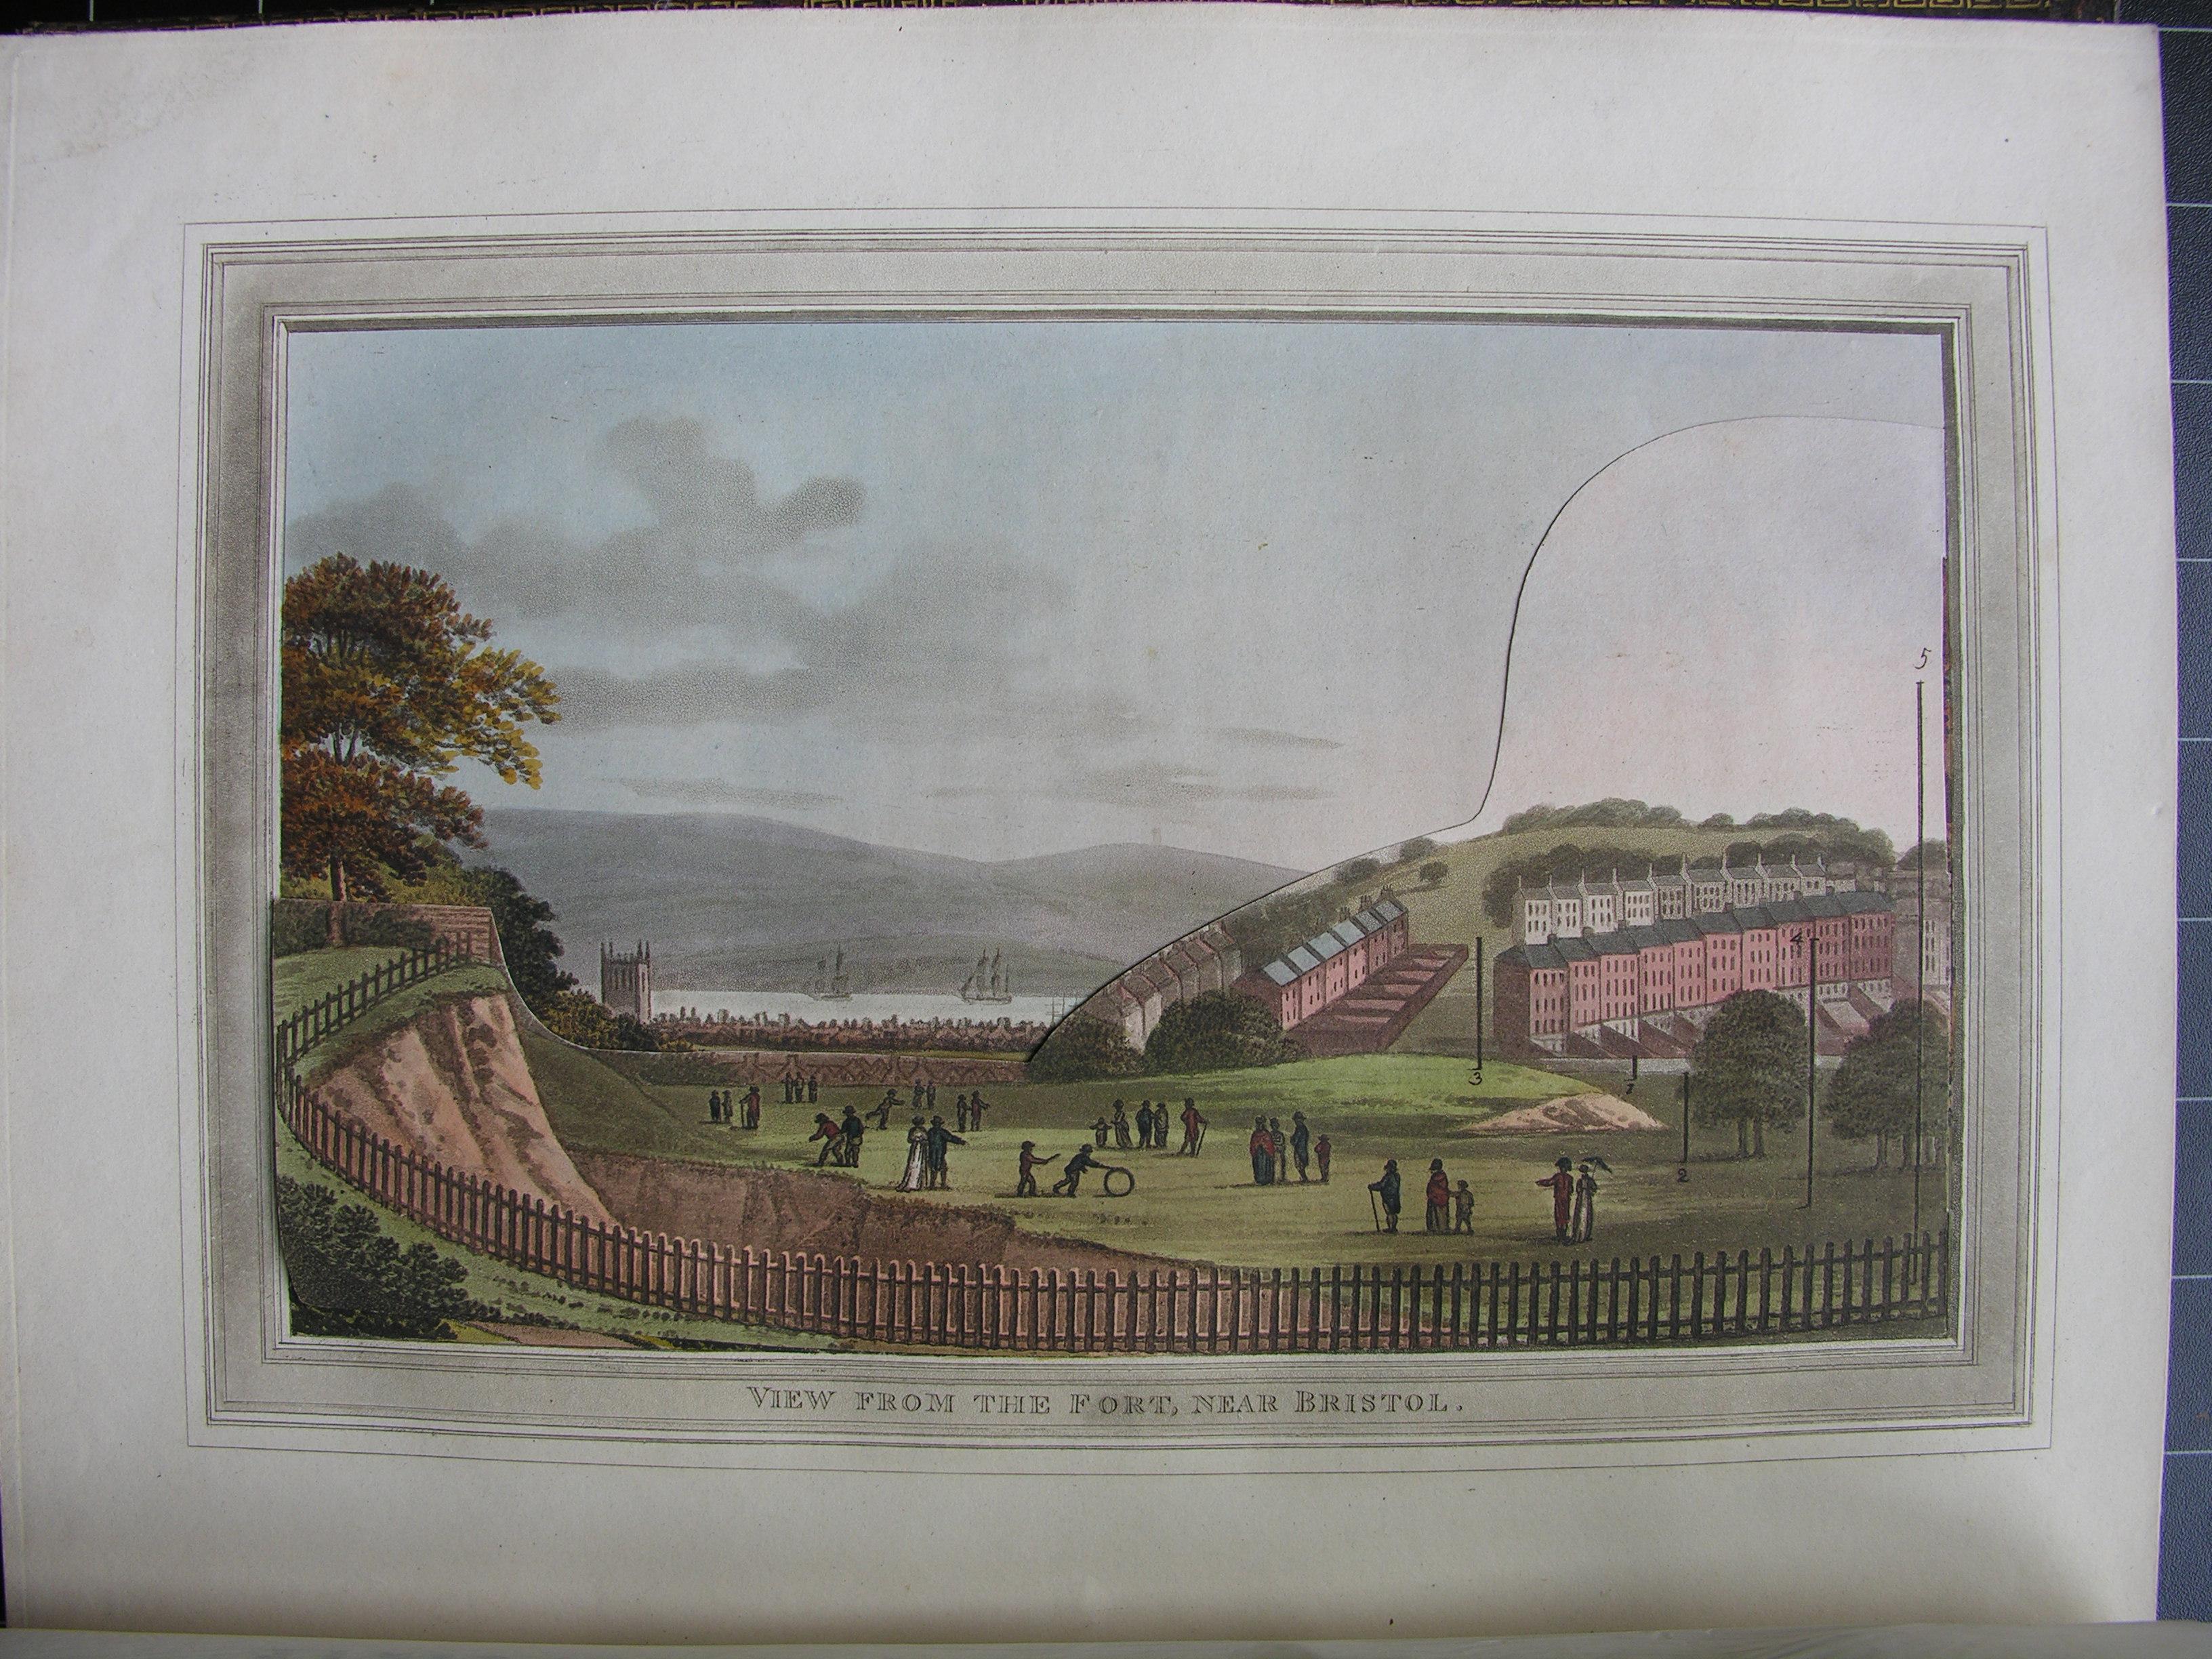 An illustration of a landscape including a view of some houses and a fence. Captioned 'View from the fort near Bristol'.